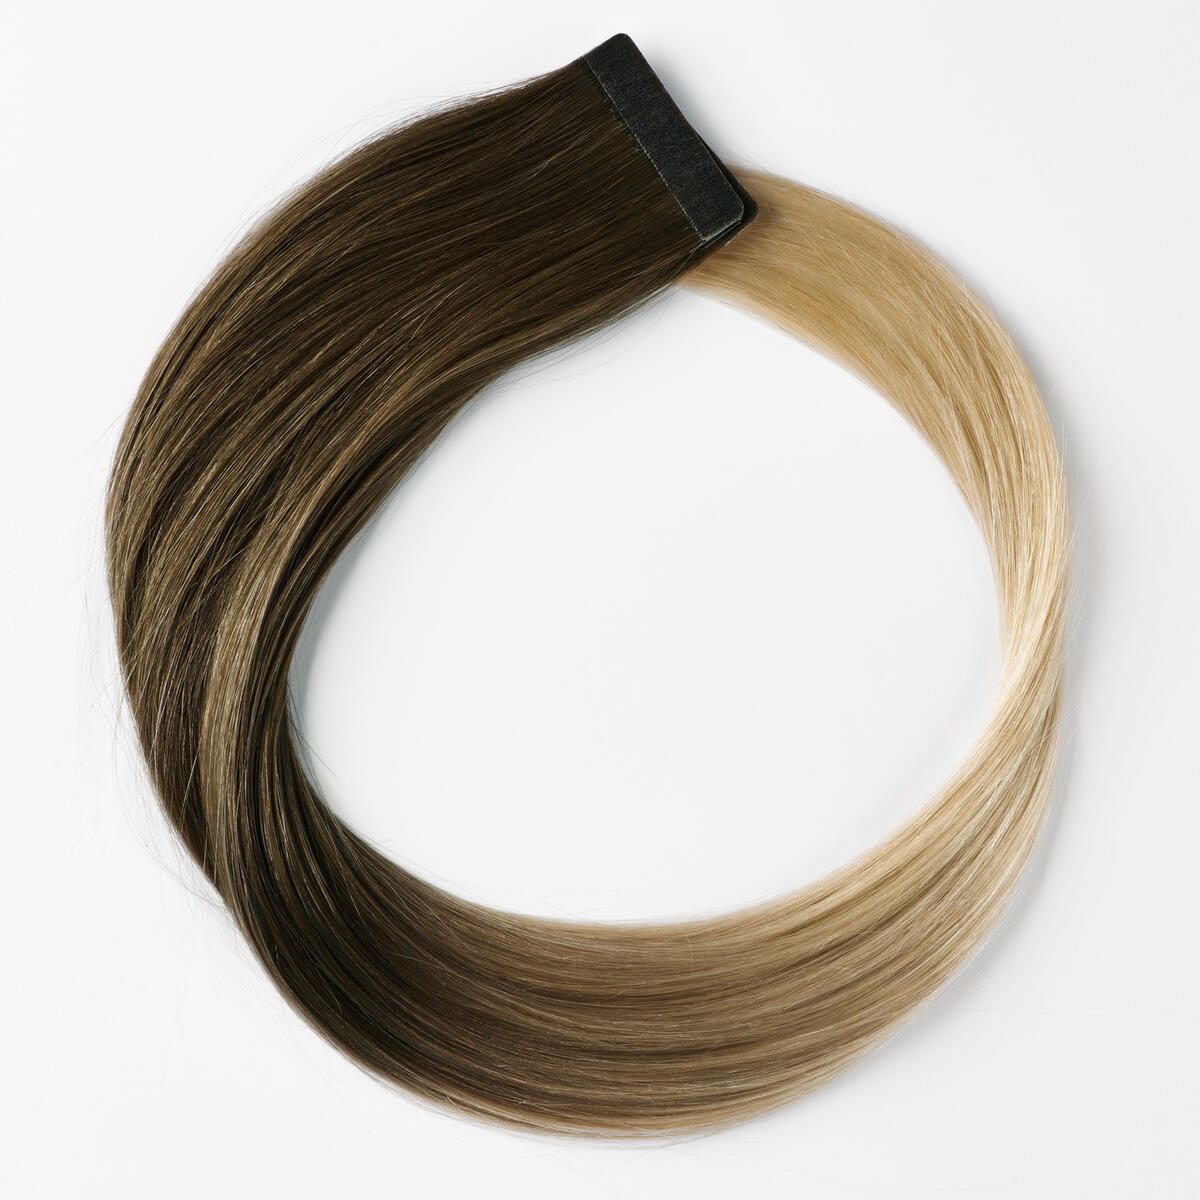 Basic Tape Extensions Classic 4 O2.6/8.0 Dark Ash Blond Ombre 50 cm